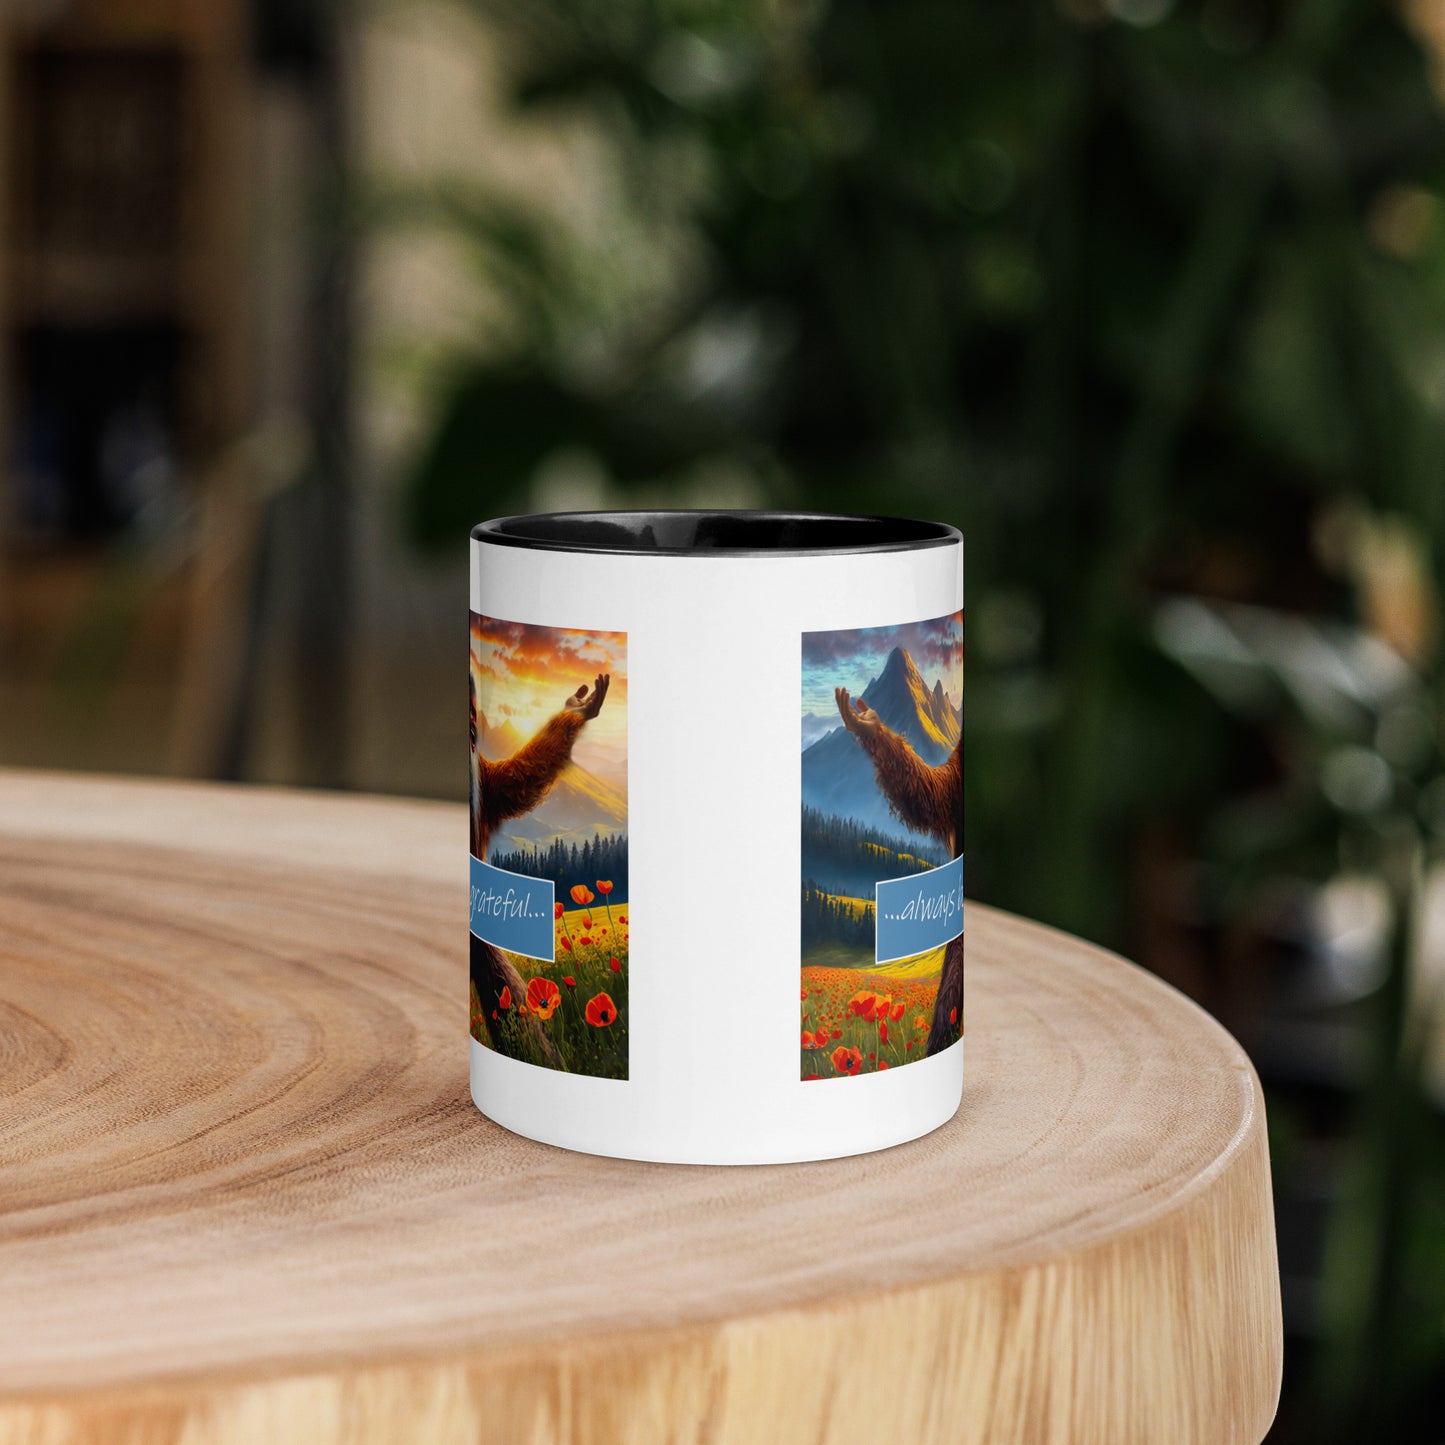 Always Be Grateful!!! Joyous Sasquatch In the Meadows and Mountains Ceramic Coffee Mug